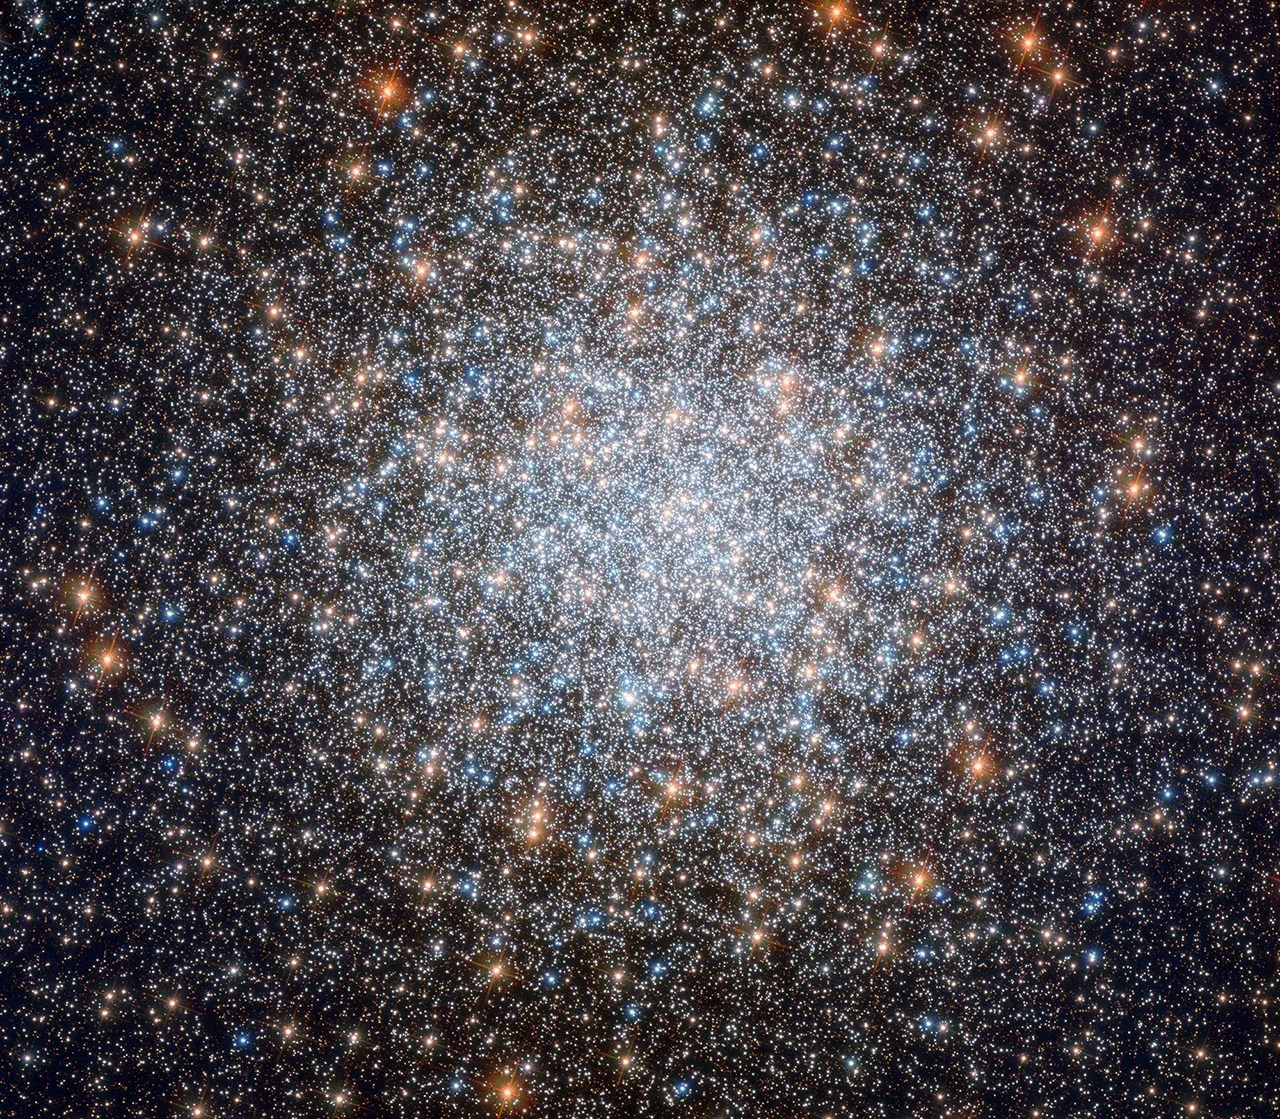 Hubble view of messier 3